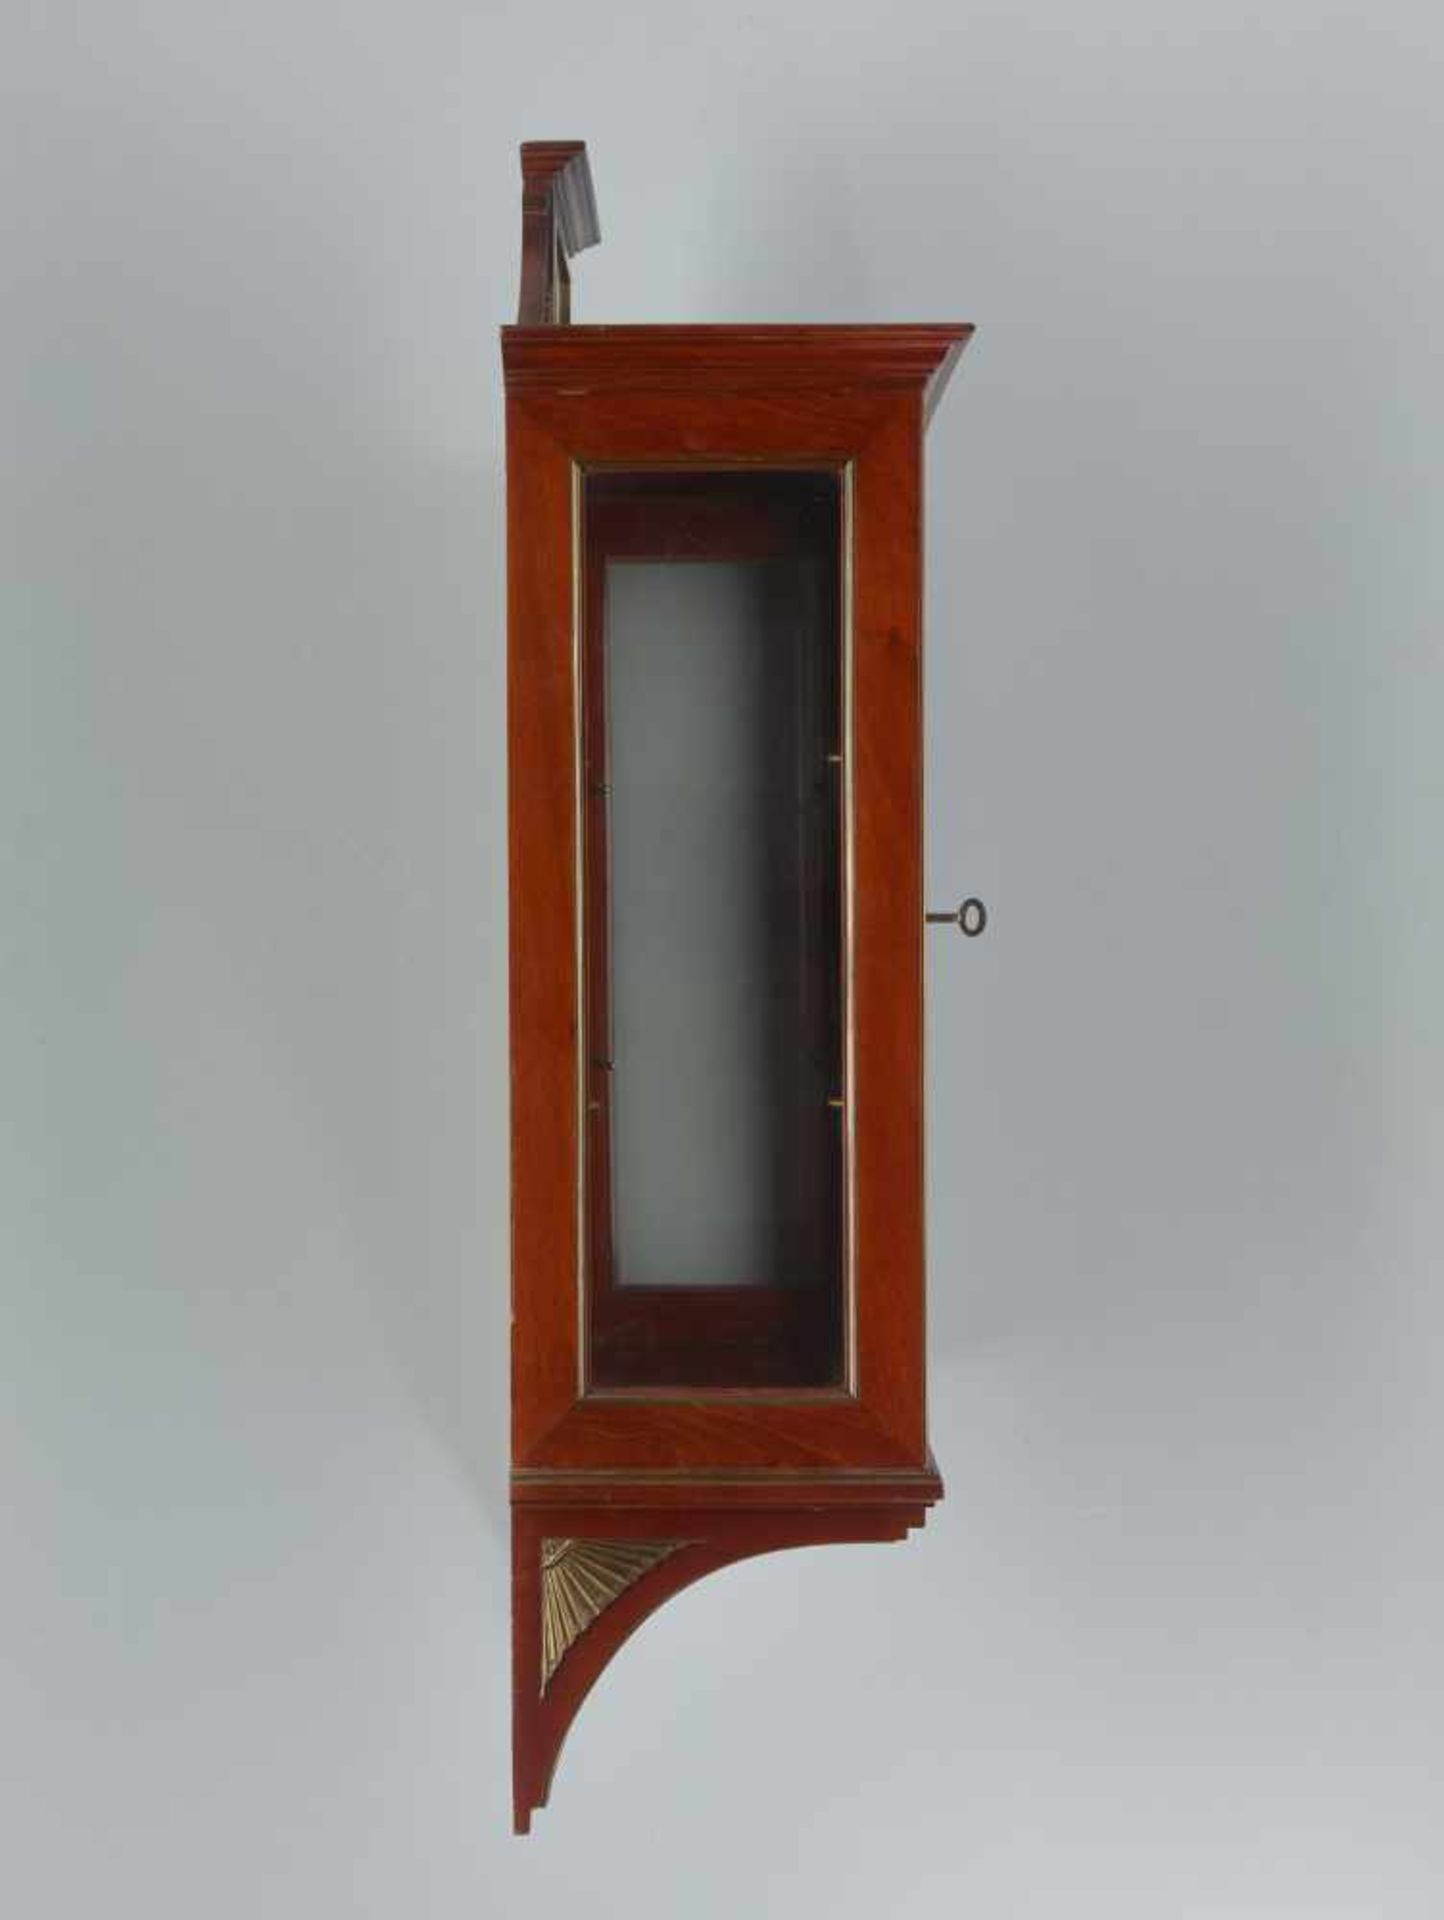 A 19th CENTURY VIENNA MAHOGANY WALL DISPLAY CABINET WITH BRASS APPLICATIONSMahogany, glass and brass - Image 2 of 7